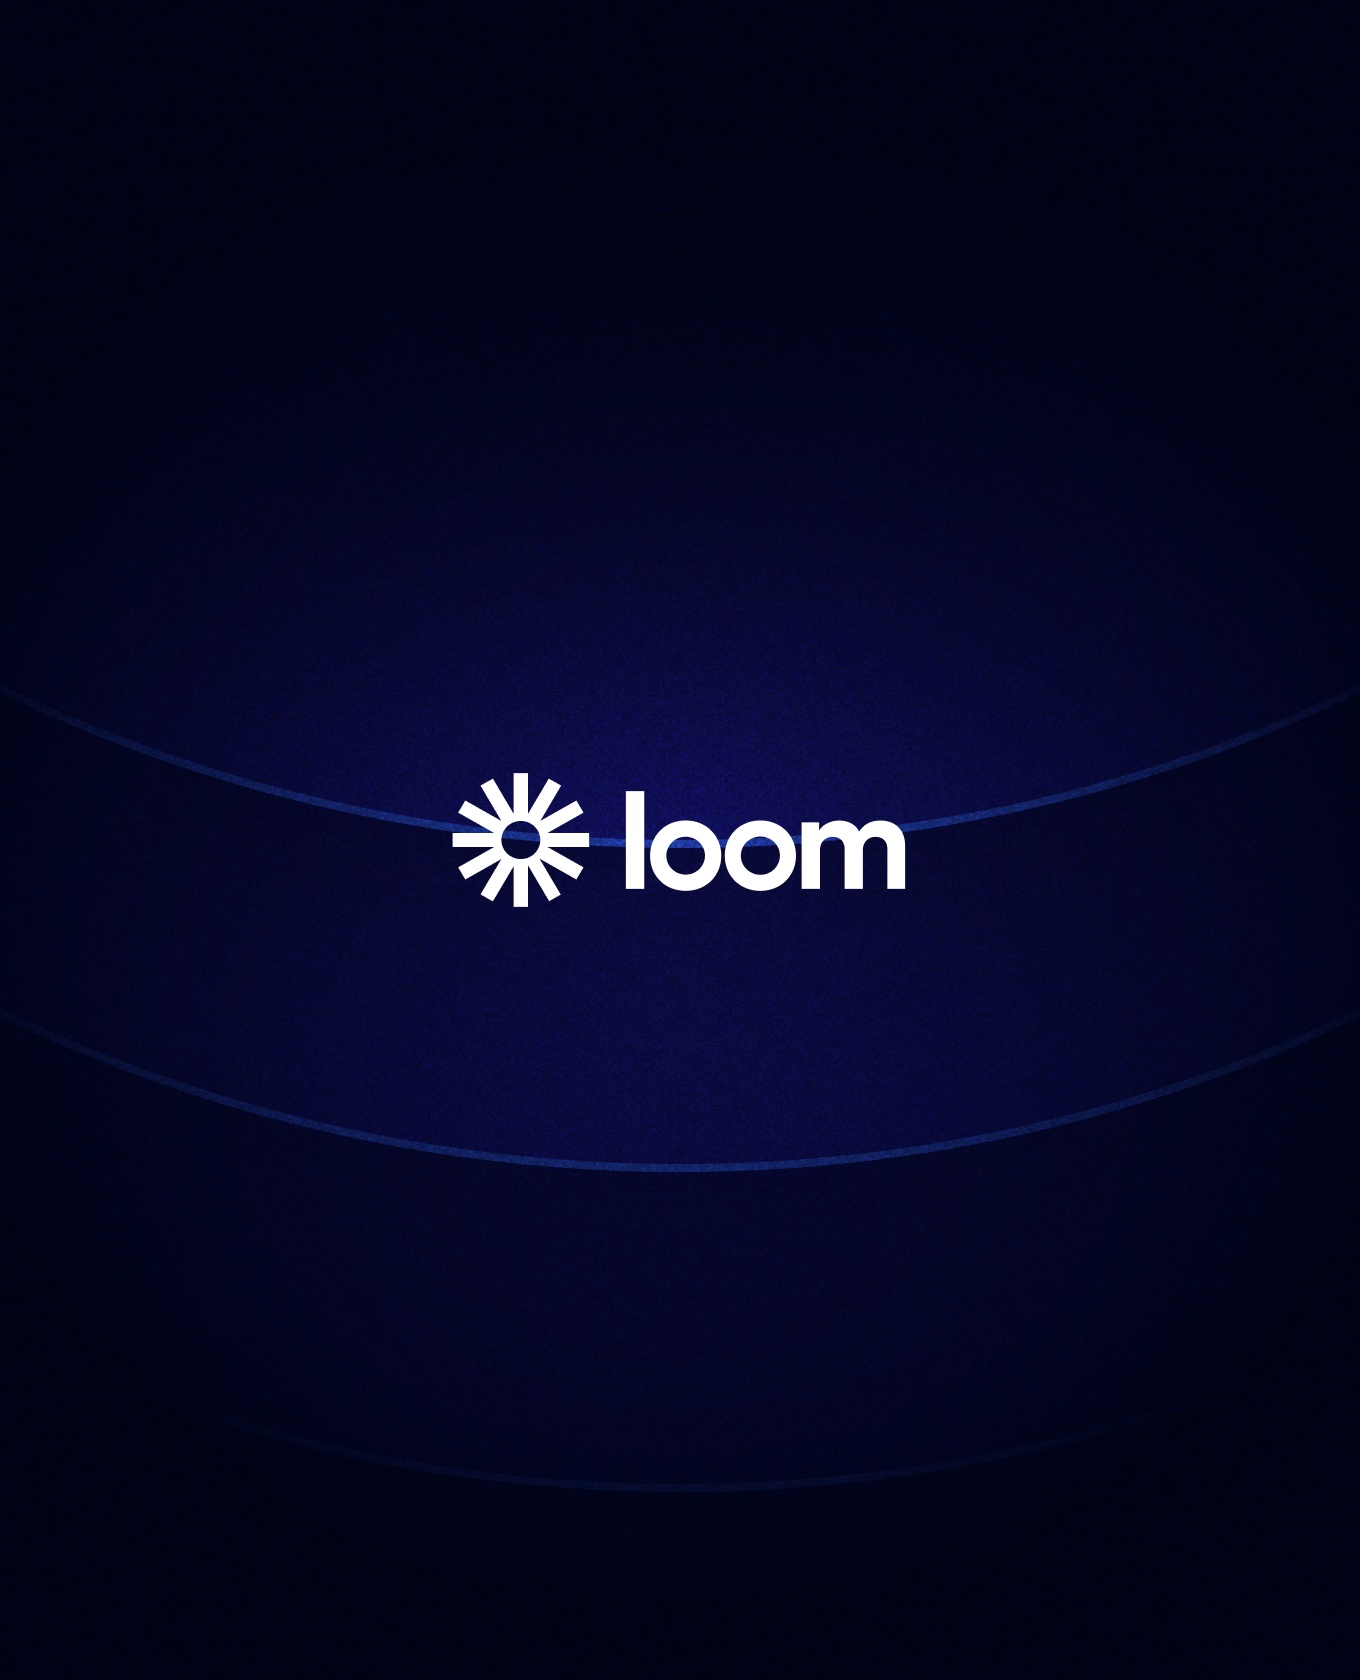 The Loom wordmark against a dark but vibrant blue background composed of abstract and expanded shapes from the wordmark.